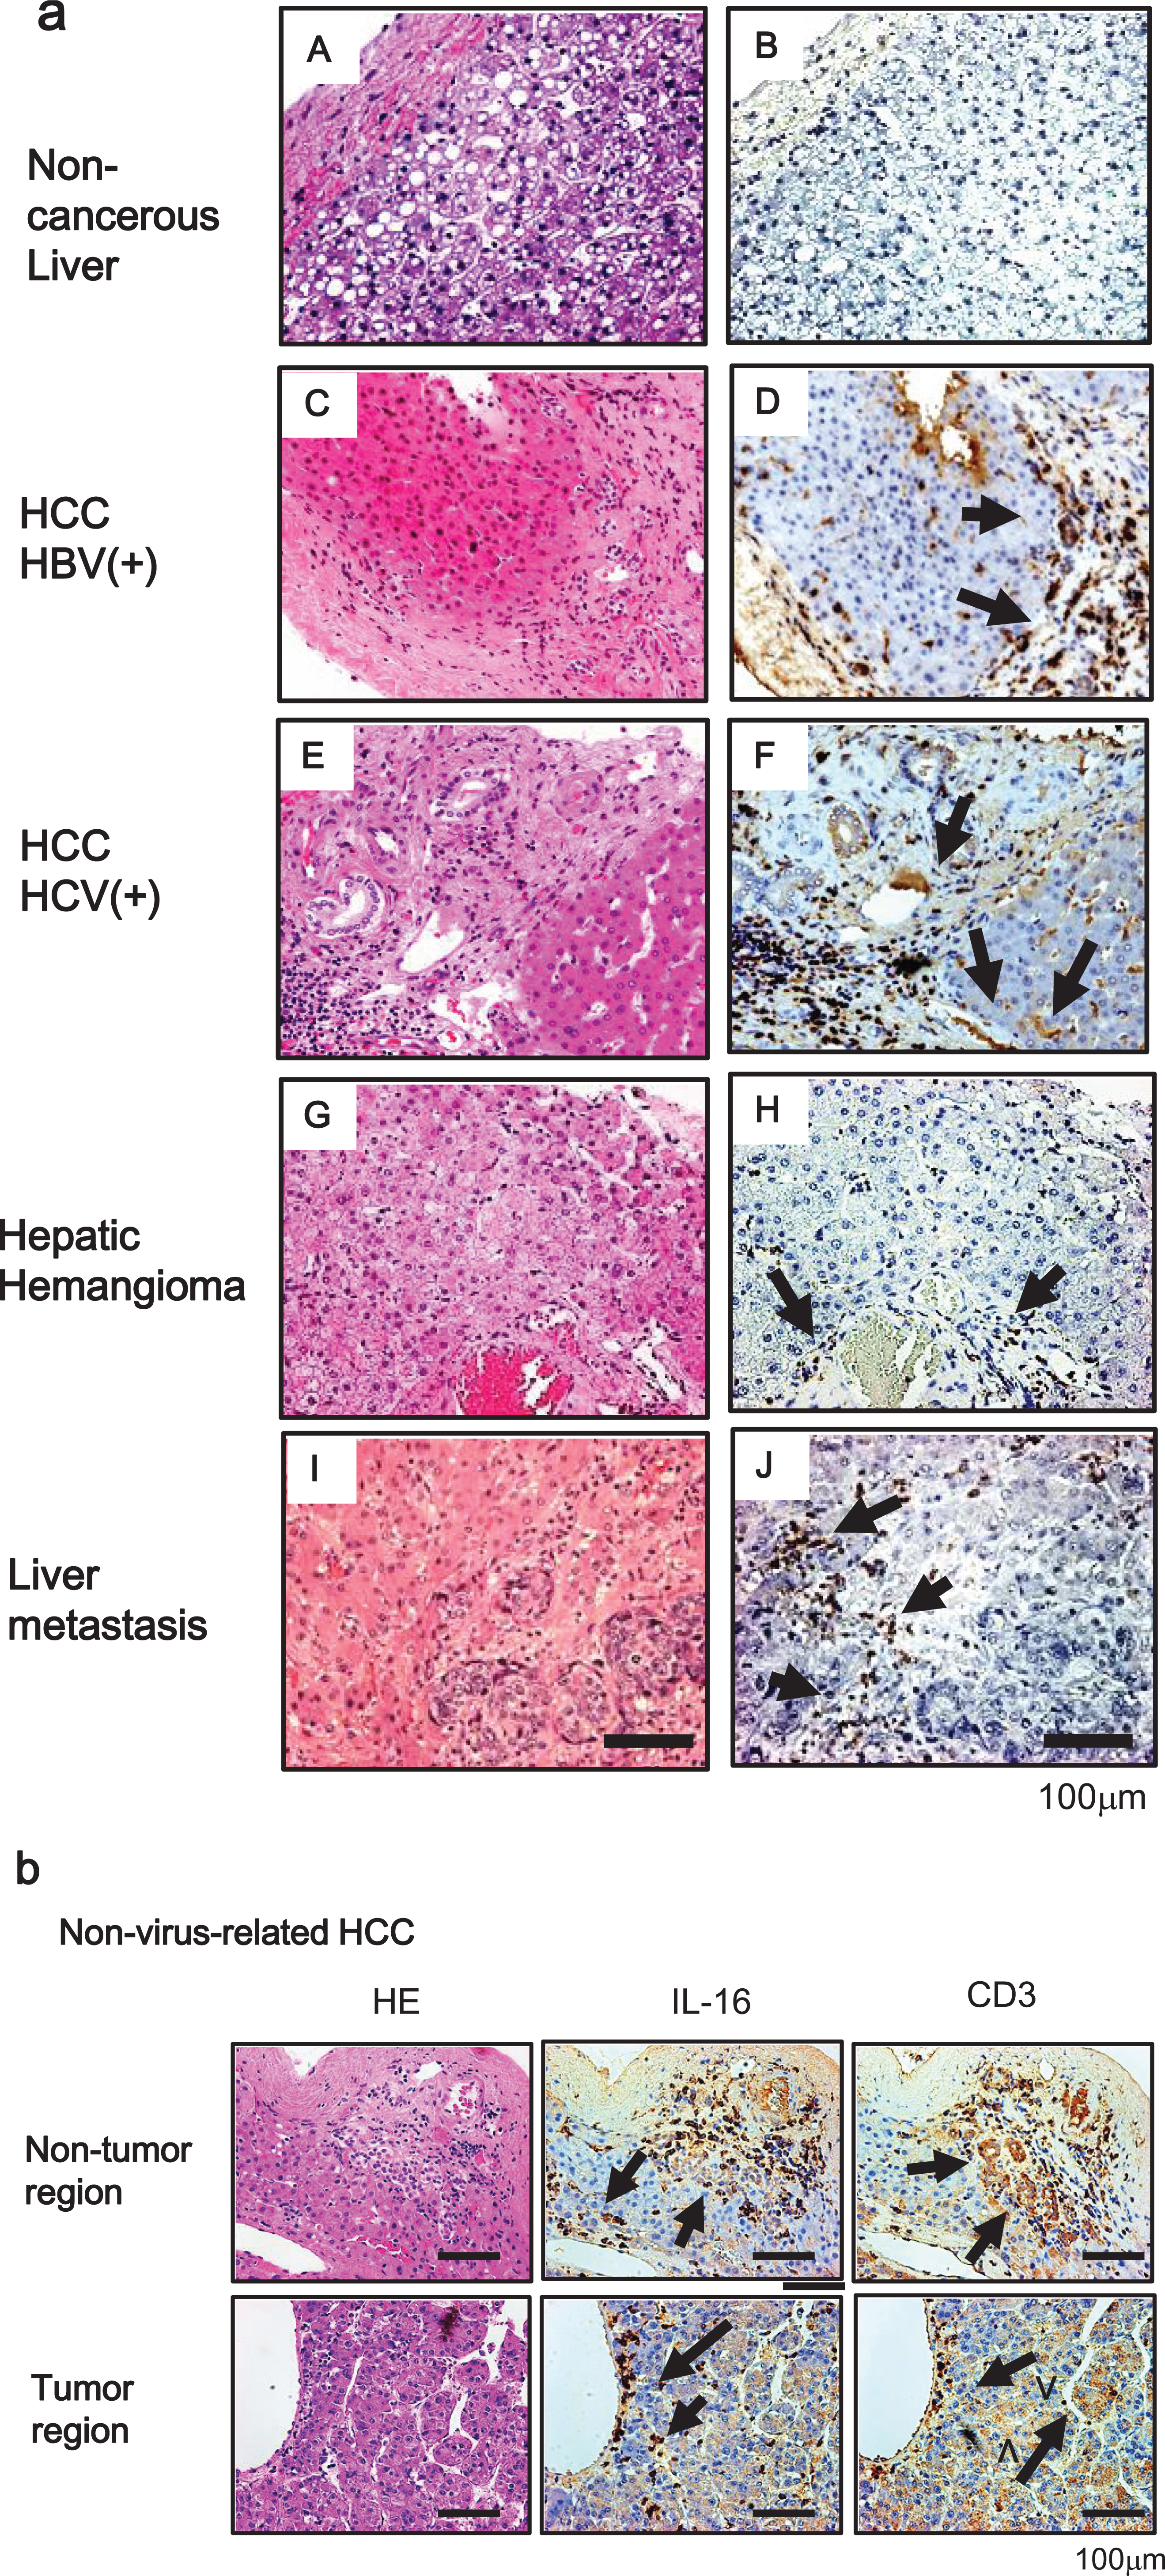 (a) Immunohistochemical analysis of IL-16 in tissue samples of noncancerous liver (B), hepatitis B virus-related HCC (D), hepatitis C virus-related HCC (F), hepatic hemangioma (H), and liver metastasis of colorectal cancer (J). Consecutive sections were stained with hematoxylin and eosin (A, C, E, G, and I). Original magnification×200. Scale bar = 100μm. (b) IL-16-positive cells around the infiltration area of CD3-positive cells from tumor (lower panel) and adjacent non-tumor regions (upper panel) of nonviral-related HCC. Consecutive sections stained with hematoxylin and eosin are shown on the right side. Original magnification×200. HBV+, hepatitis B virus-positive; HCV+, hepatitis C virus-positive. Scale bar = 100μm.